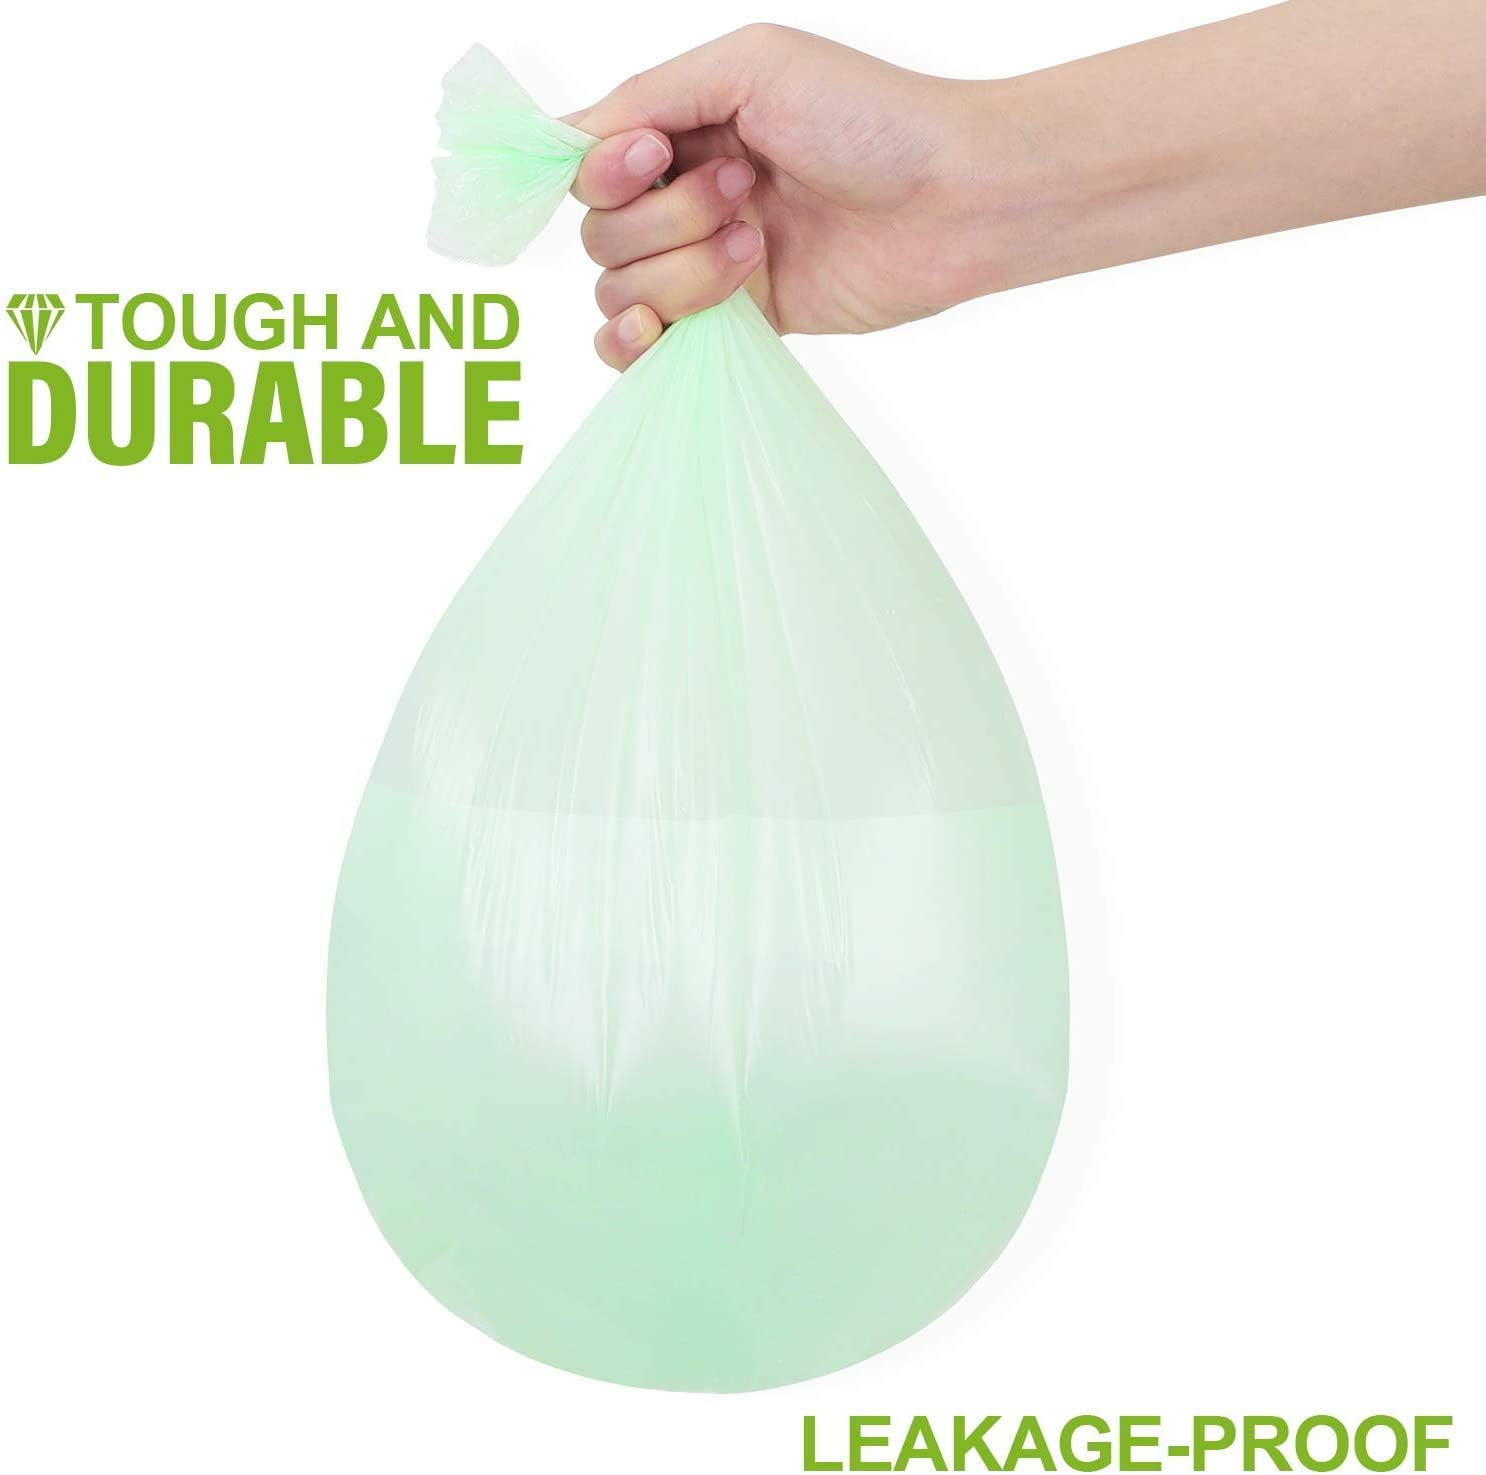 1.2 Gallon Small Plastic Trash Bags 4.5 Liters Clear Wastebasket Liners Garbage Bags for Bathroom 150 Counts